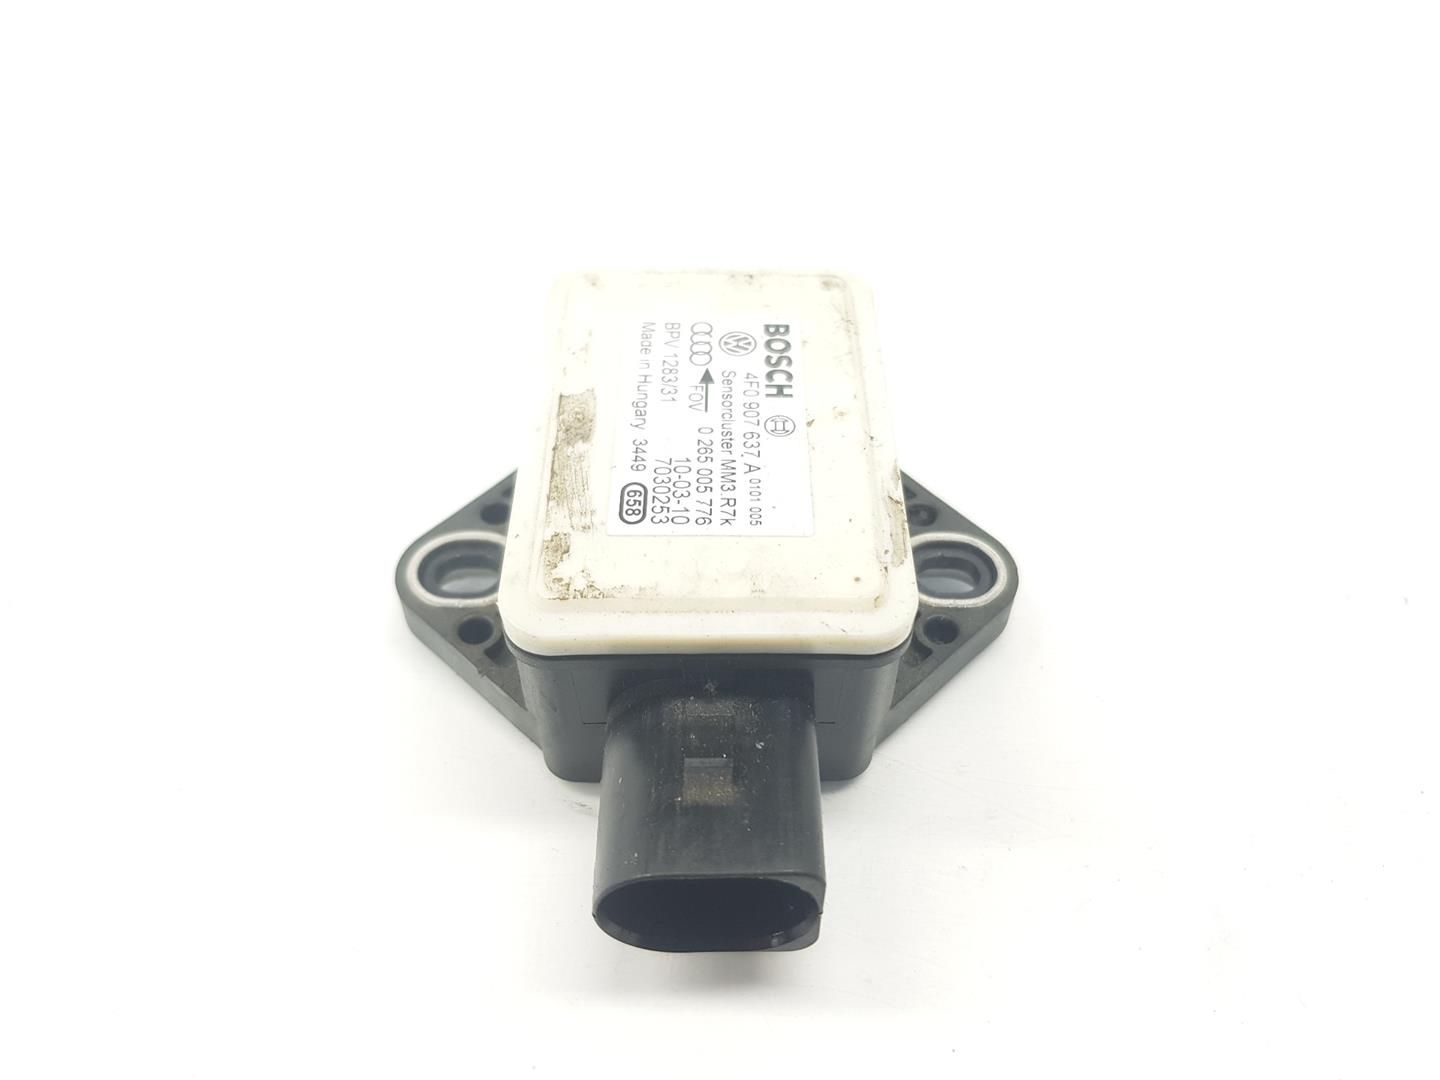 SEAT Exeo 1 generation (2009-2012) Other Control Units 4F0907637A, 4F0907637A 24697374